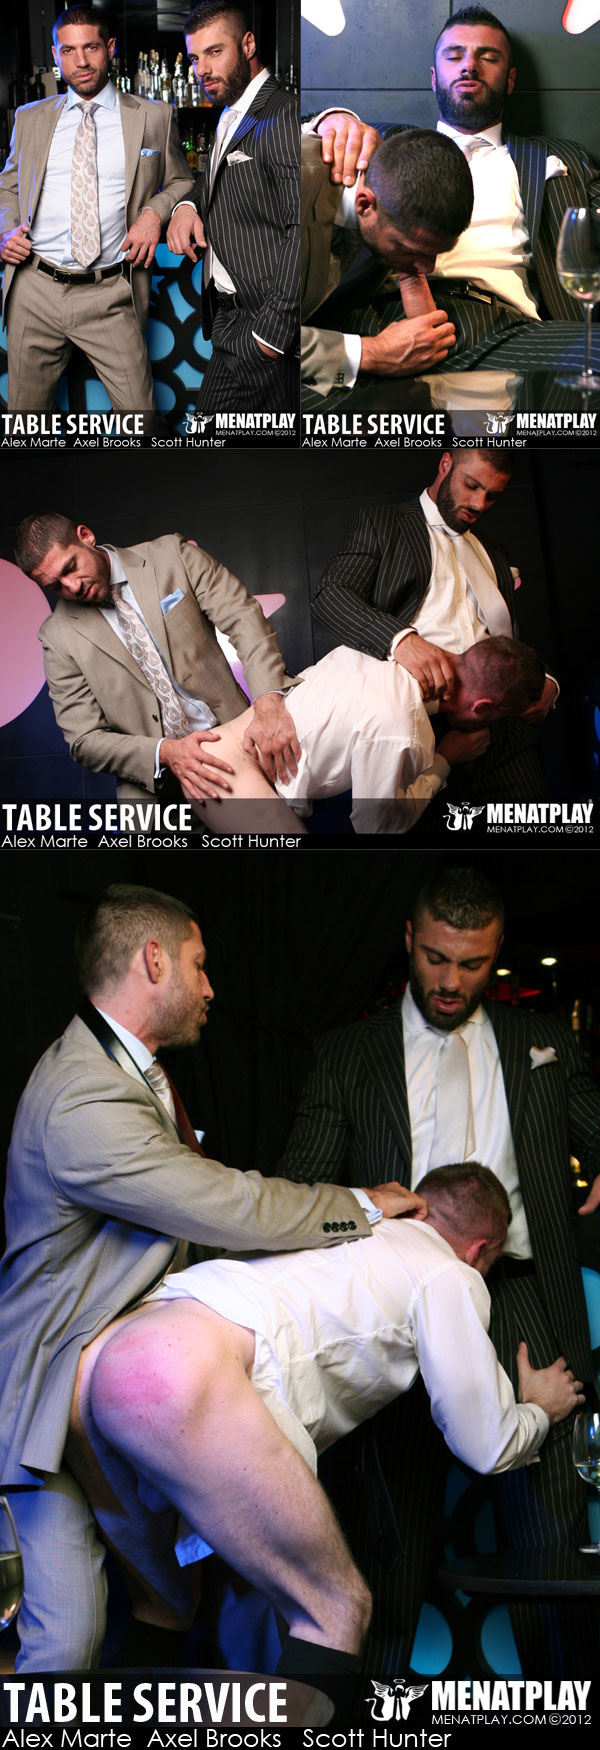 Axel Marte, Axel Brooks and Scott Hunter in Table Service